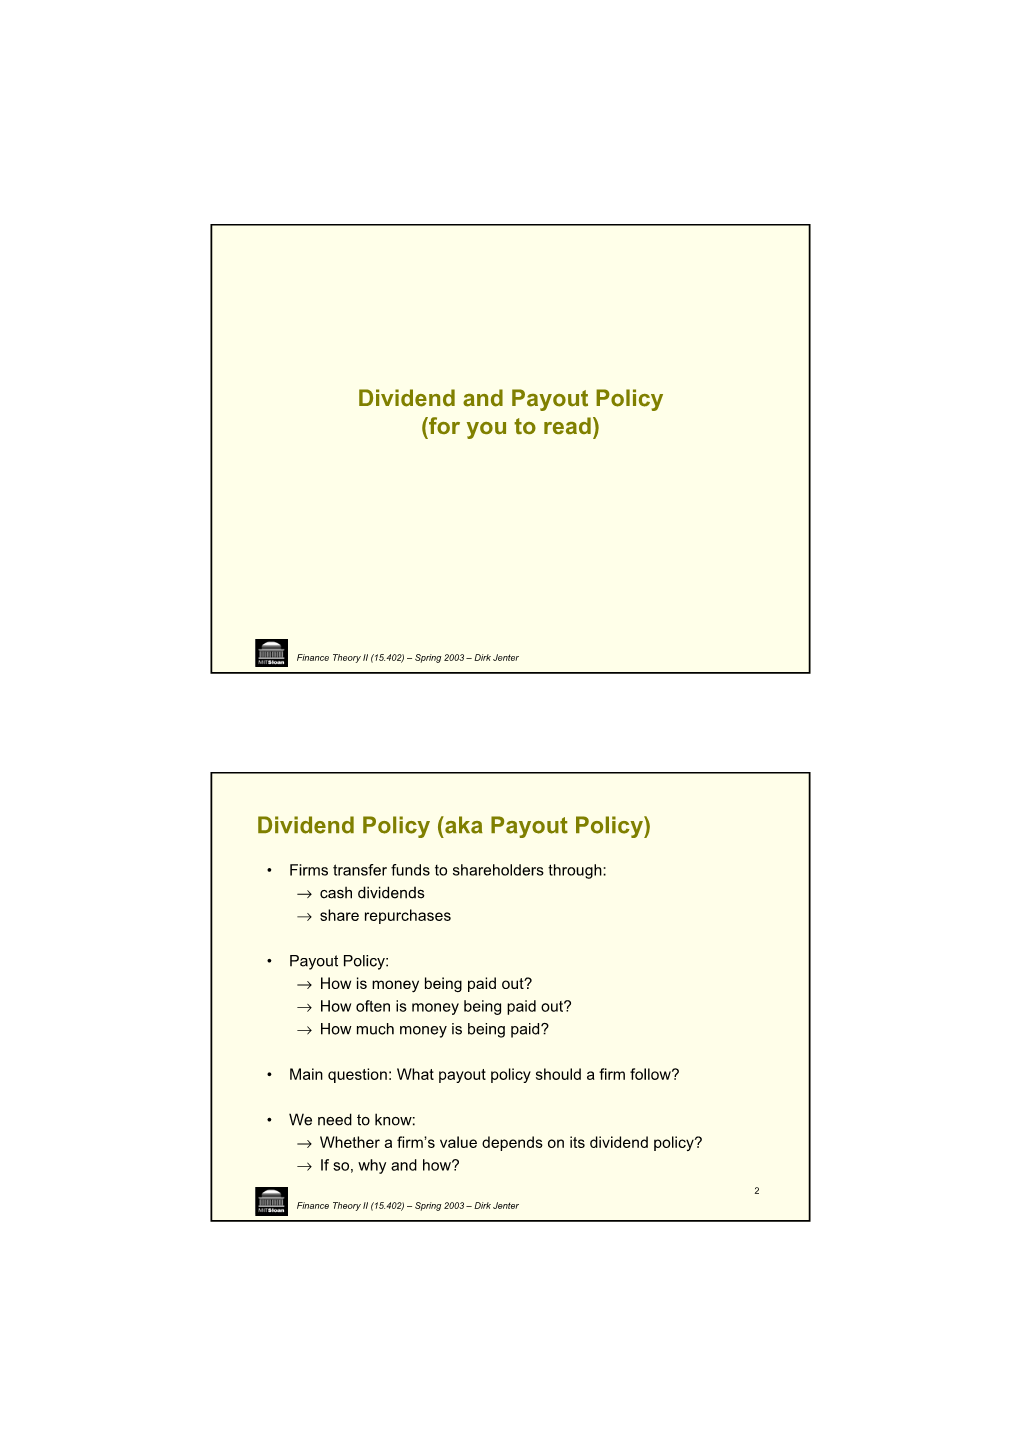 Dividend and Payout Policy (For You to Read) Dividend Policy (Aka Payout